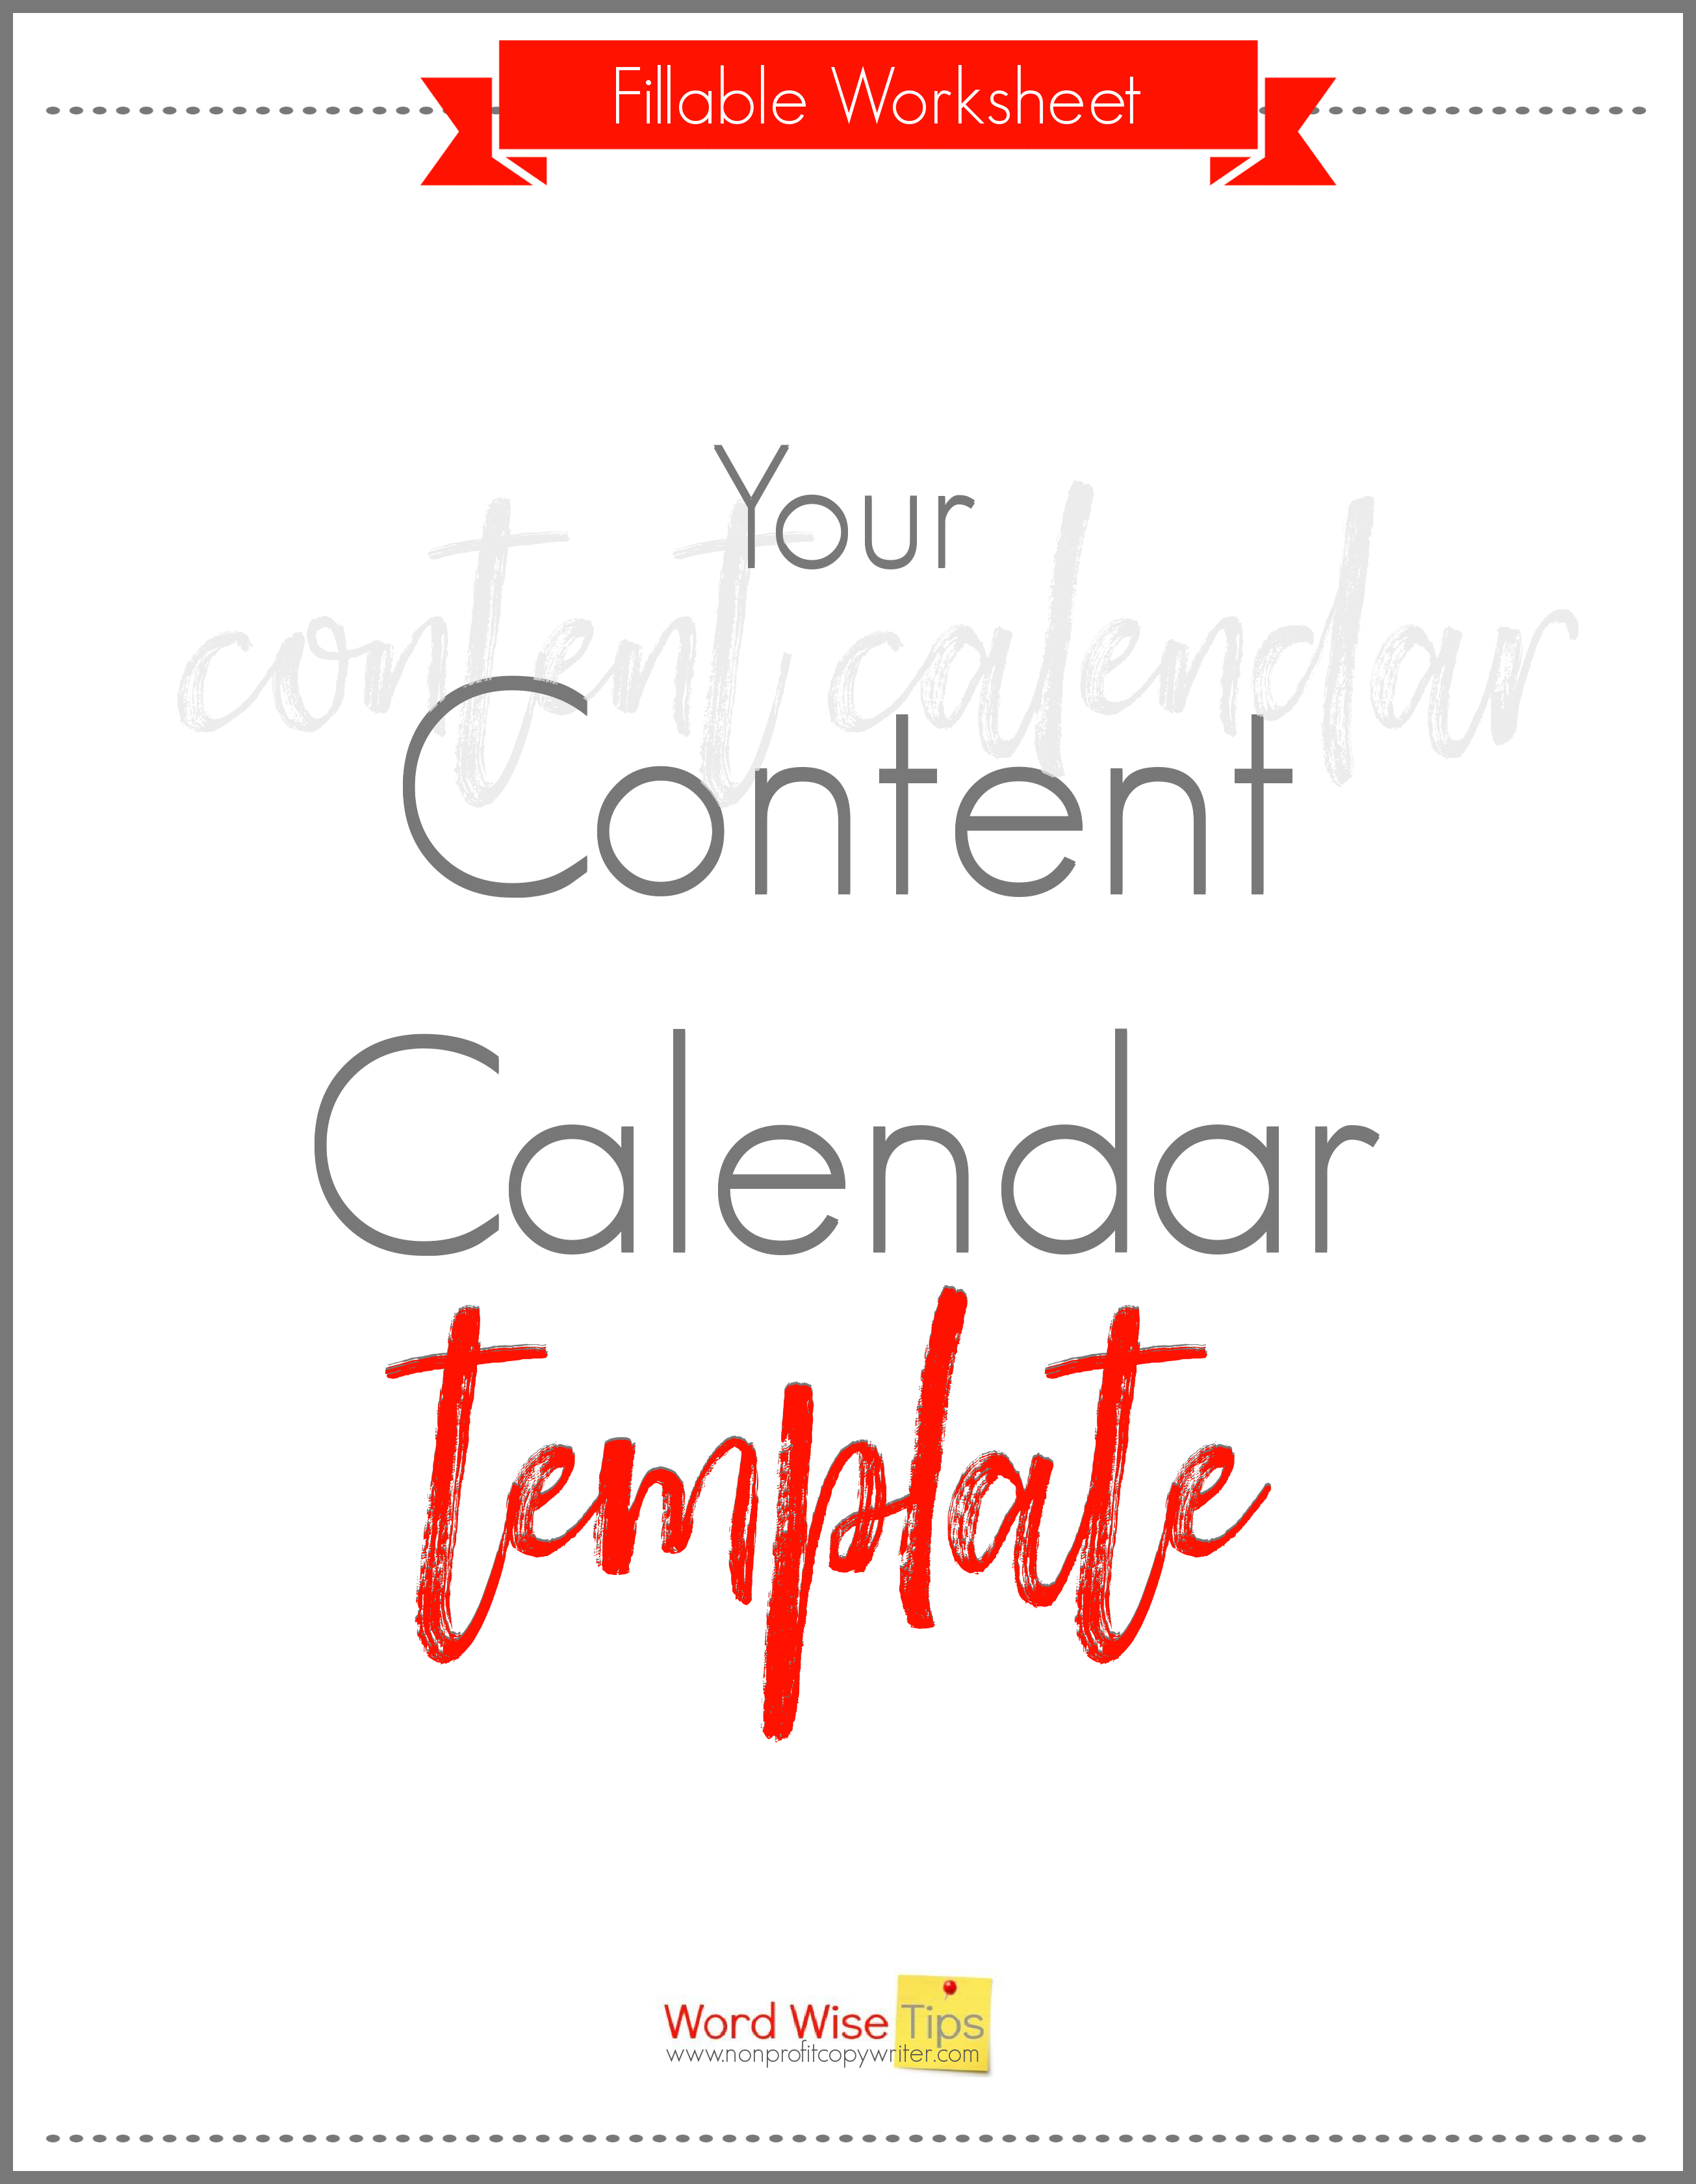 A Simple Content Calendar Template for Bloggers and Solopreneurs